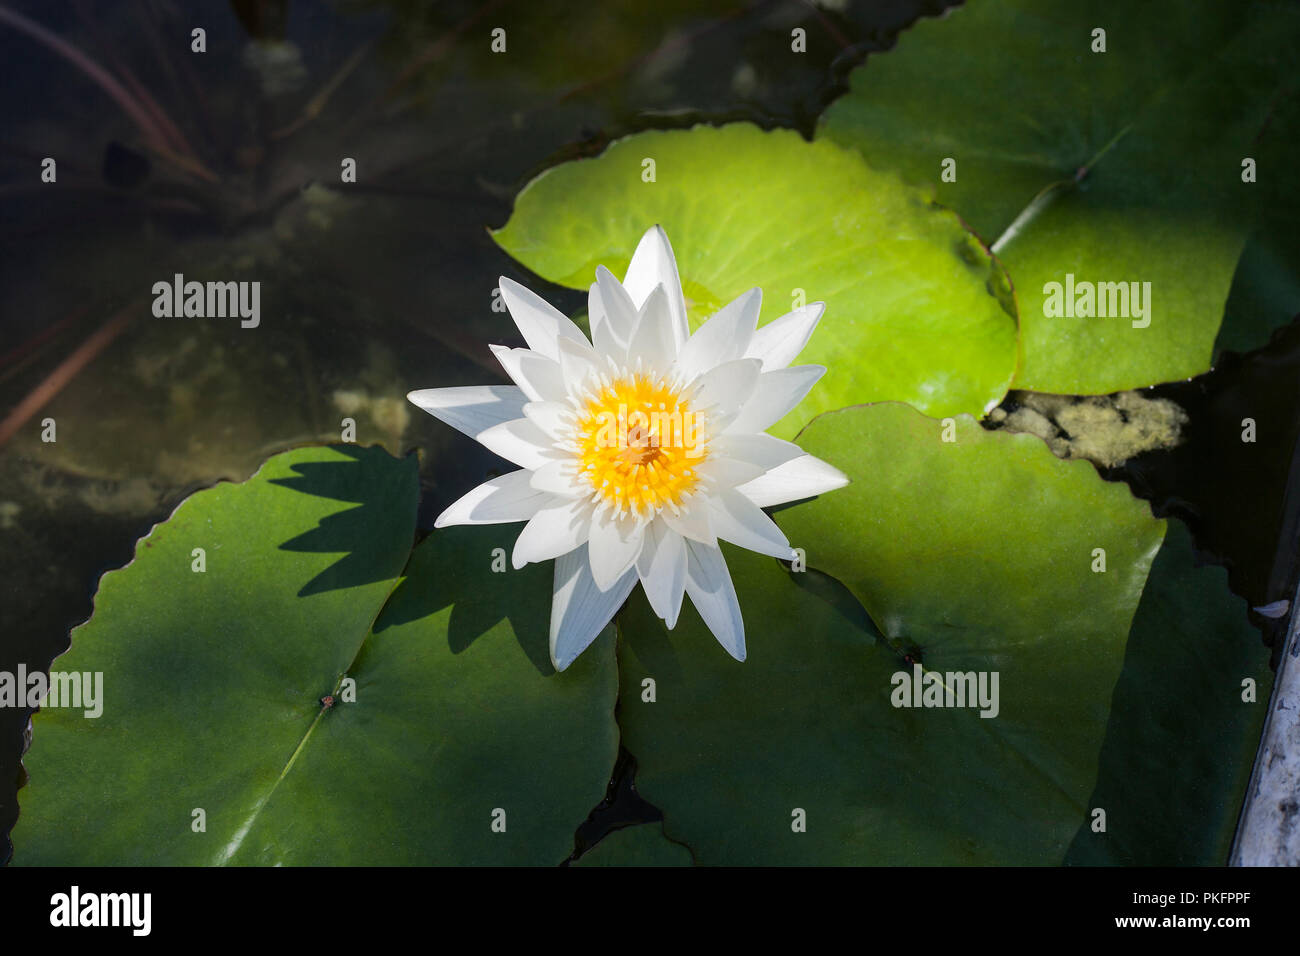 White Finnish Water lily blossom, top view. Beauty Nymphaea tetragona wild flower in pond, ornamental water garden Stock Photo